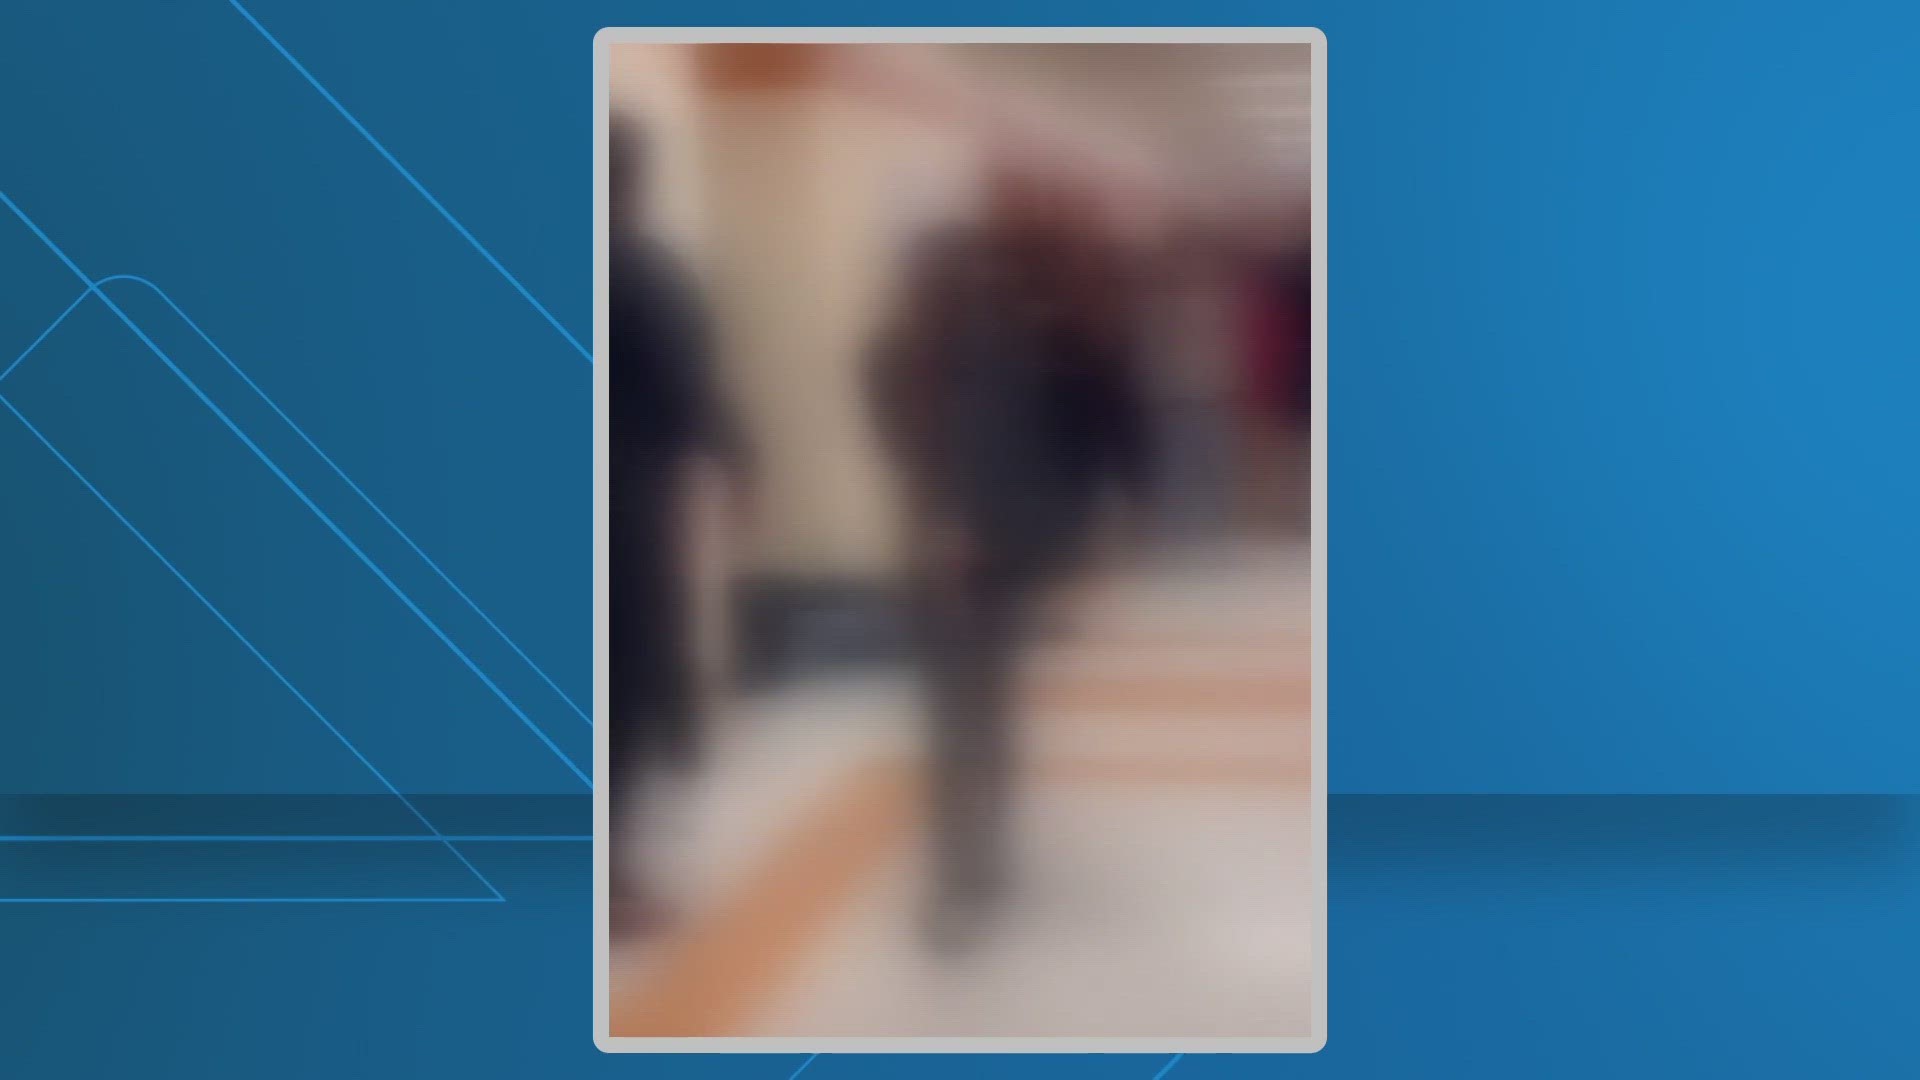 A number of security officers put an end to an outbreak of fighting at Clarksburg High School in Montgomery county today.